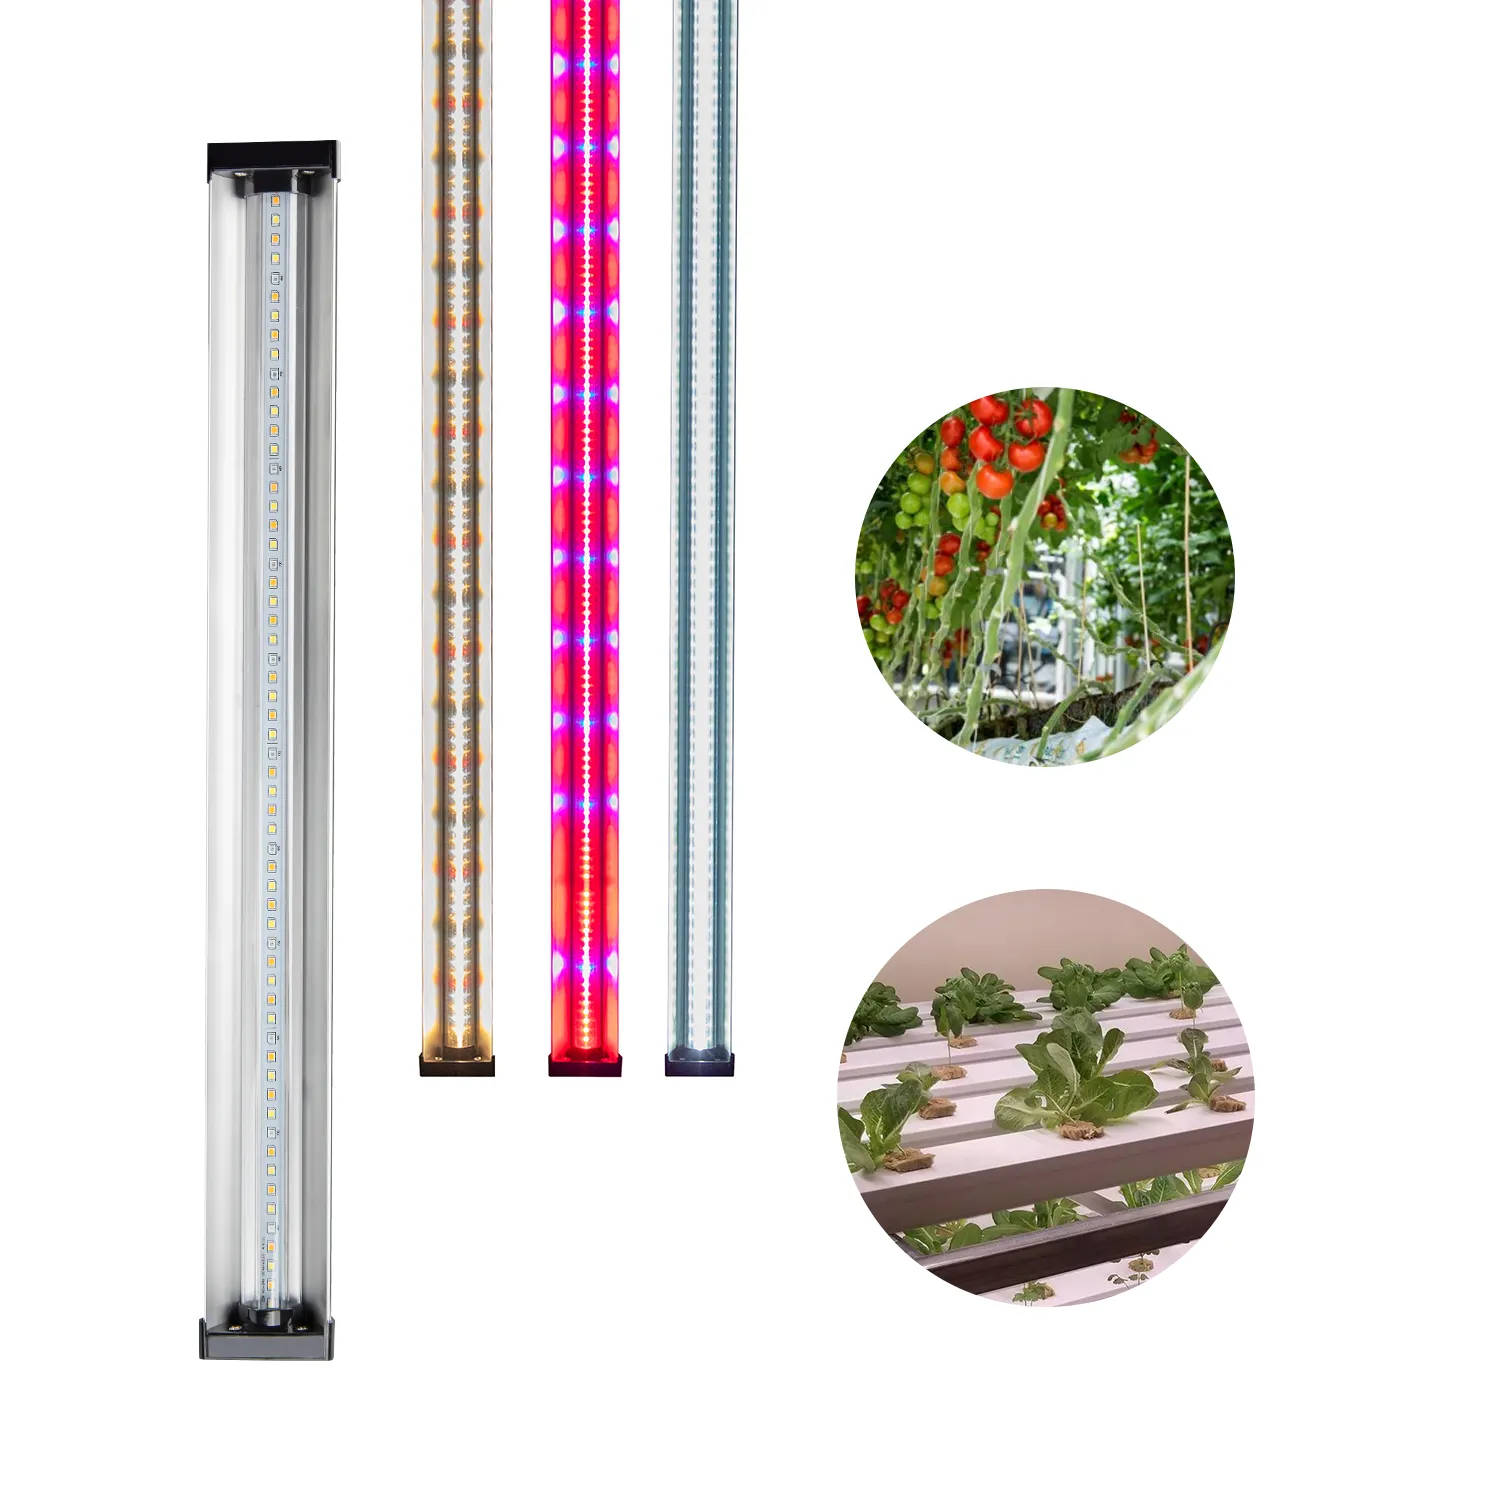 super indoor greenhouse full spectrum vertical farming aquaponics hydroponic growing systems led grow lights